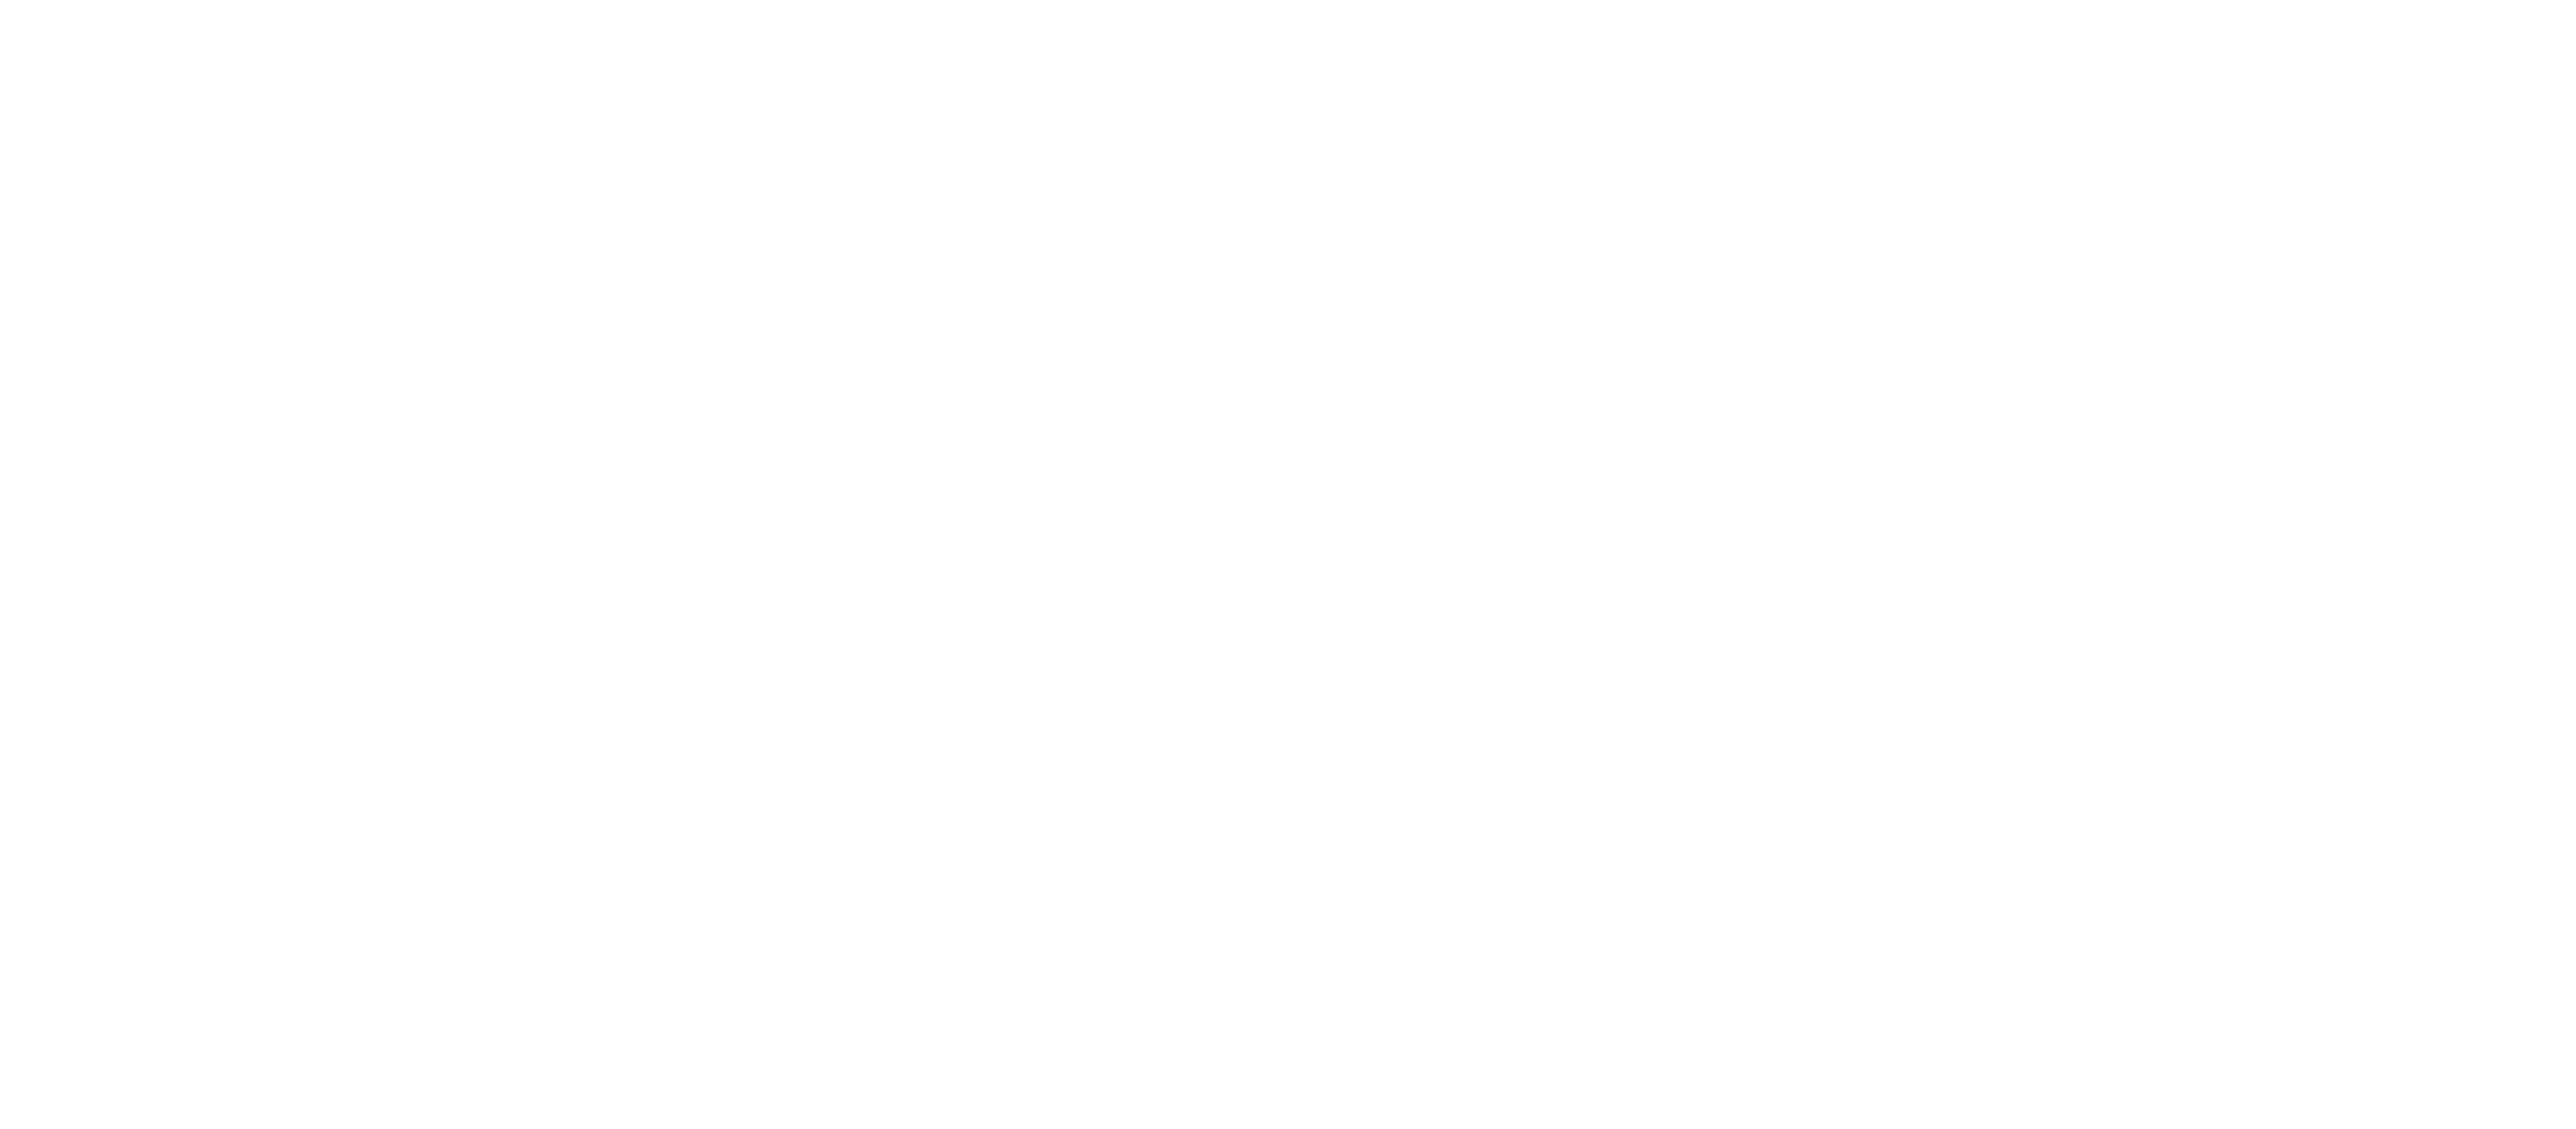 Charles Campbell Construction